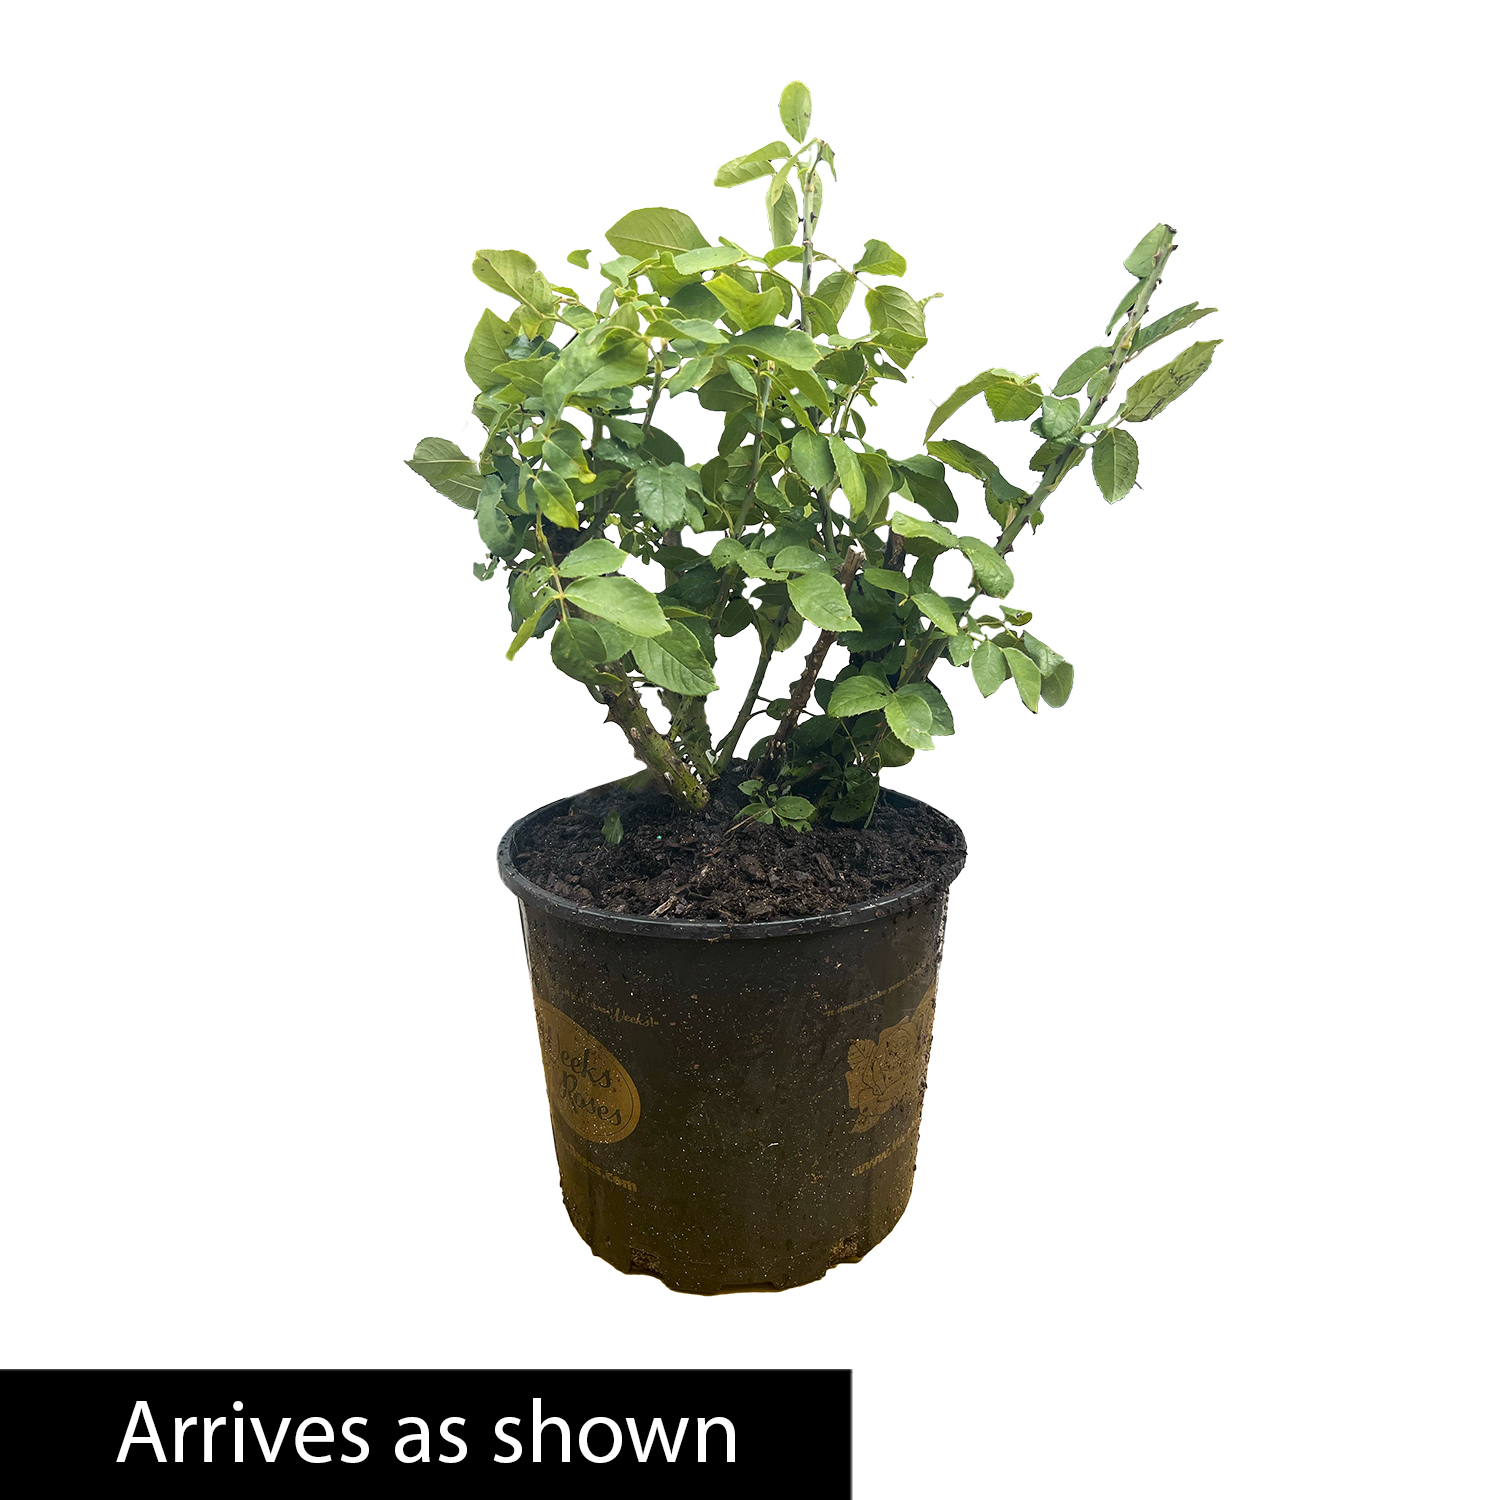 Joseph's Coat Climbing Rose, 3 Gallon Potted Potted Flowering Plant (1-Pack) - image 4 of 4